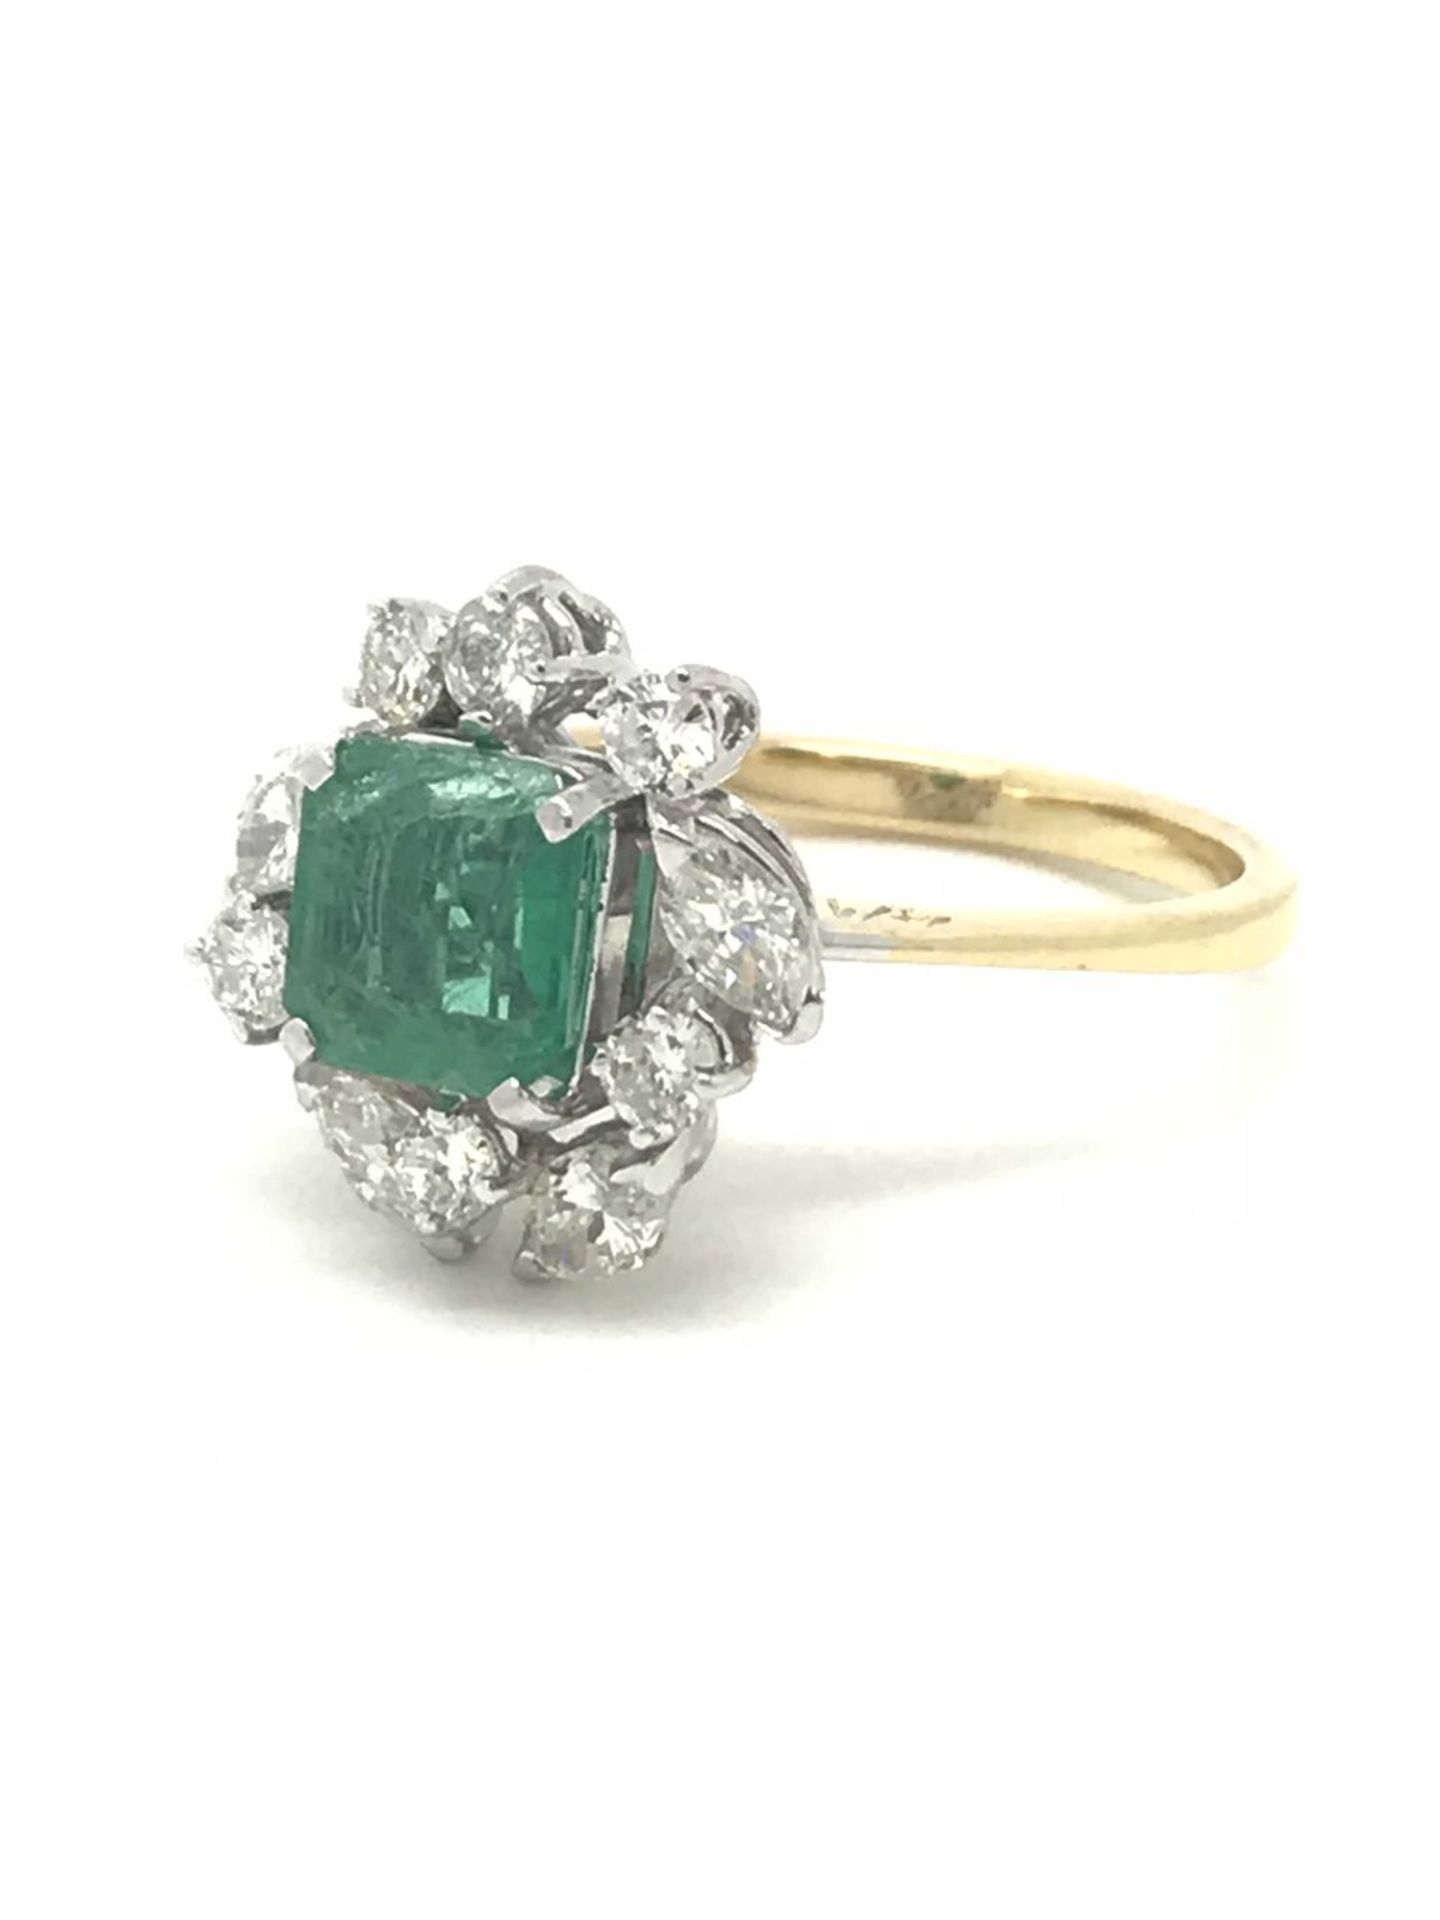 Emerald & Diamond (1.05ct) Cluster Ring, 18ct Yellow Gold - Image 2 of 5